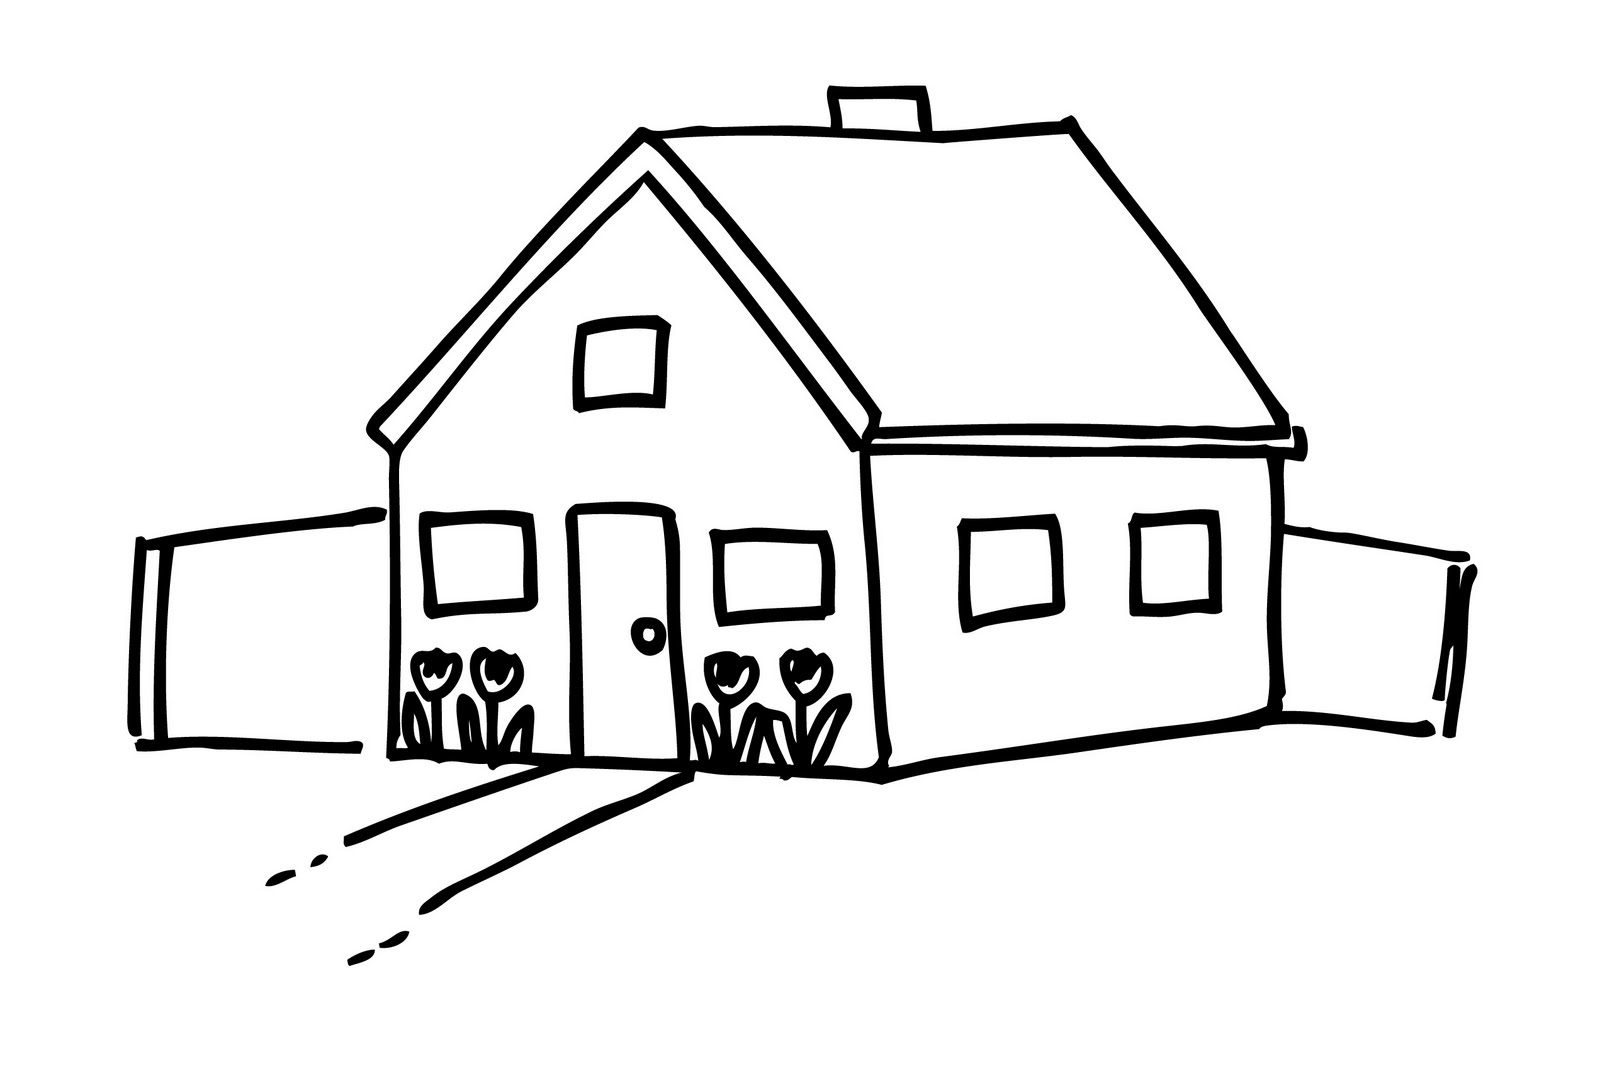 house clipart black and% .